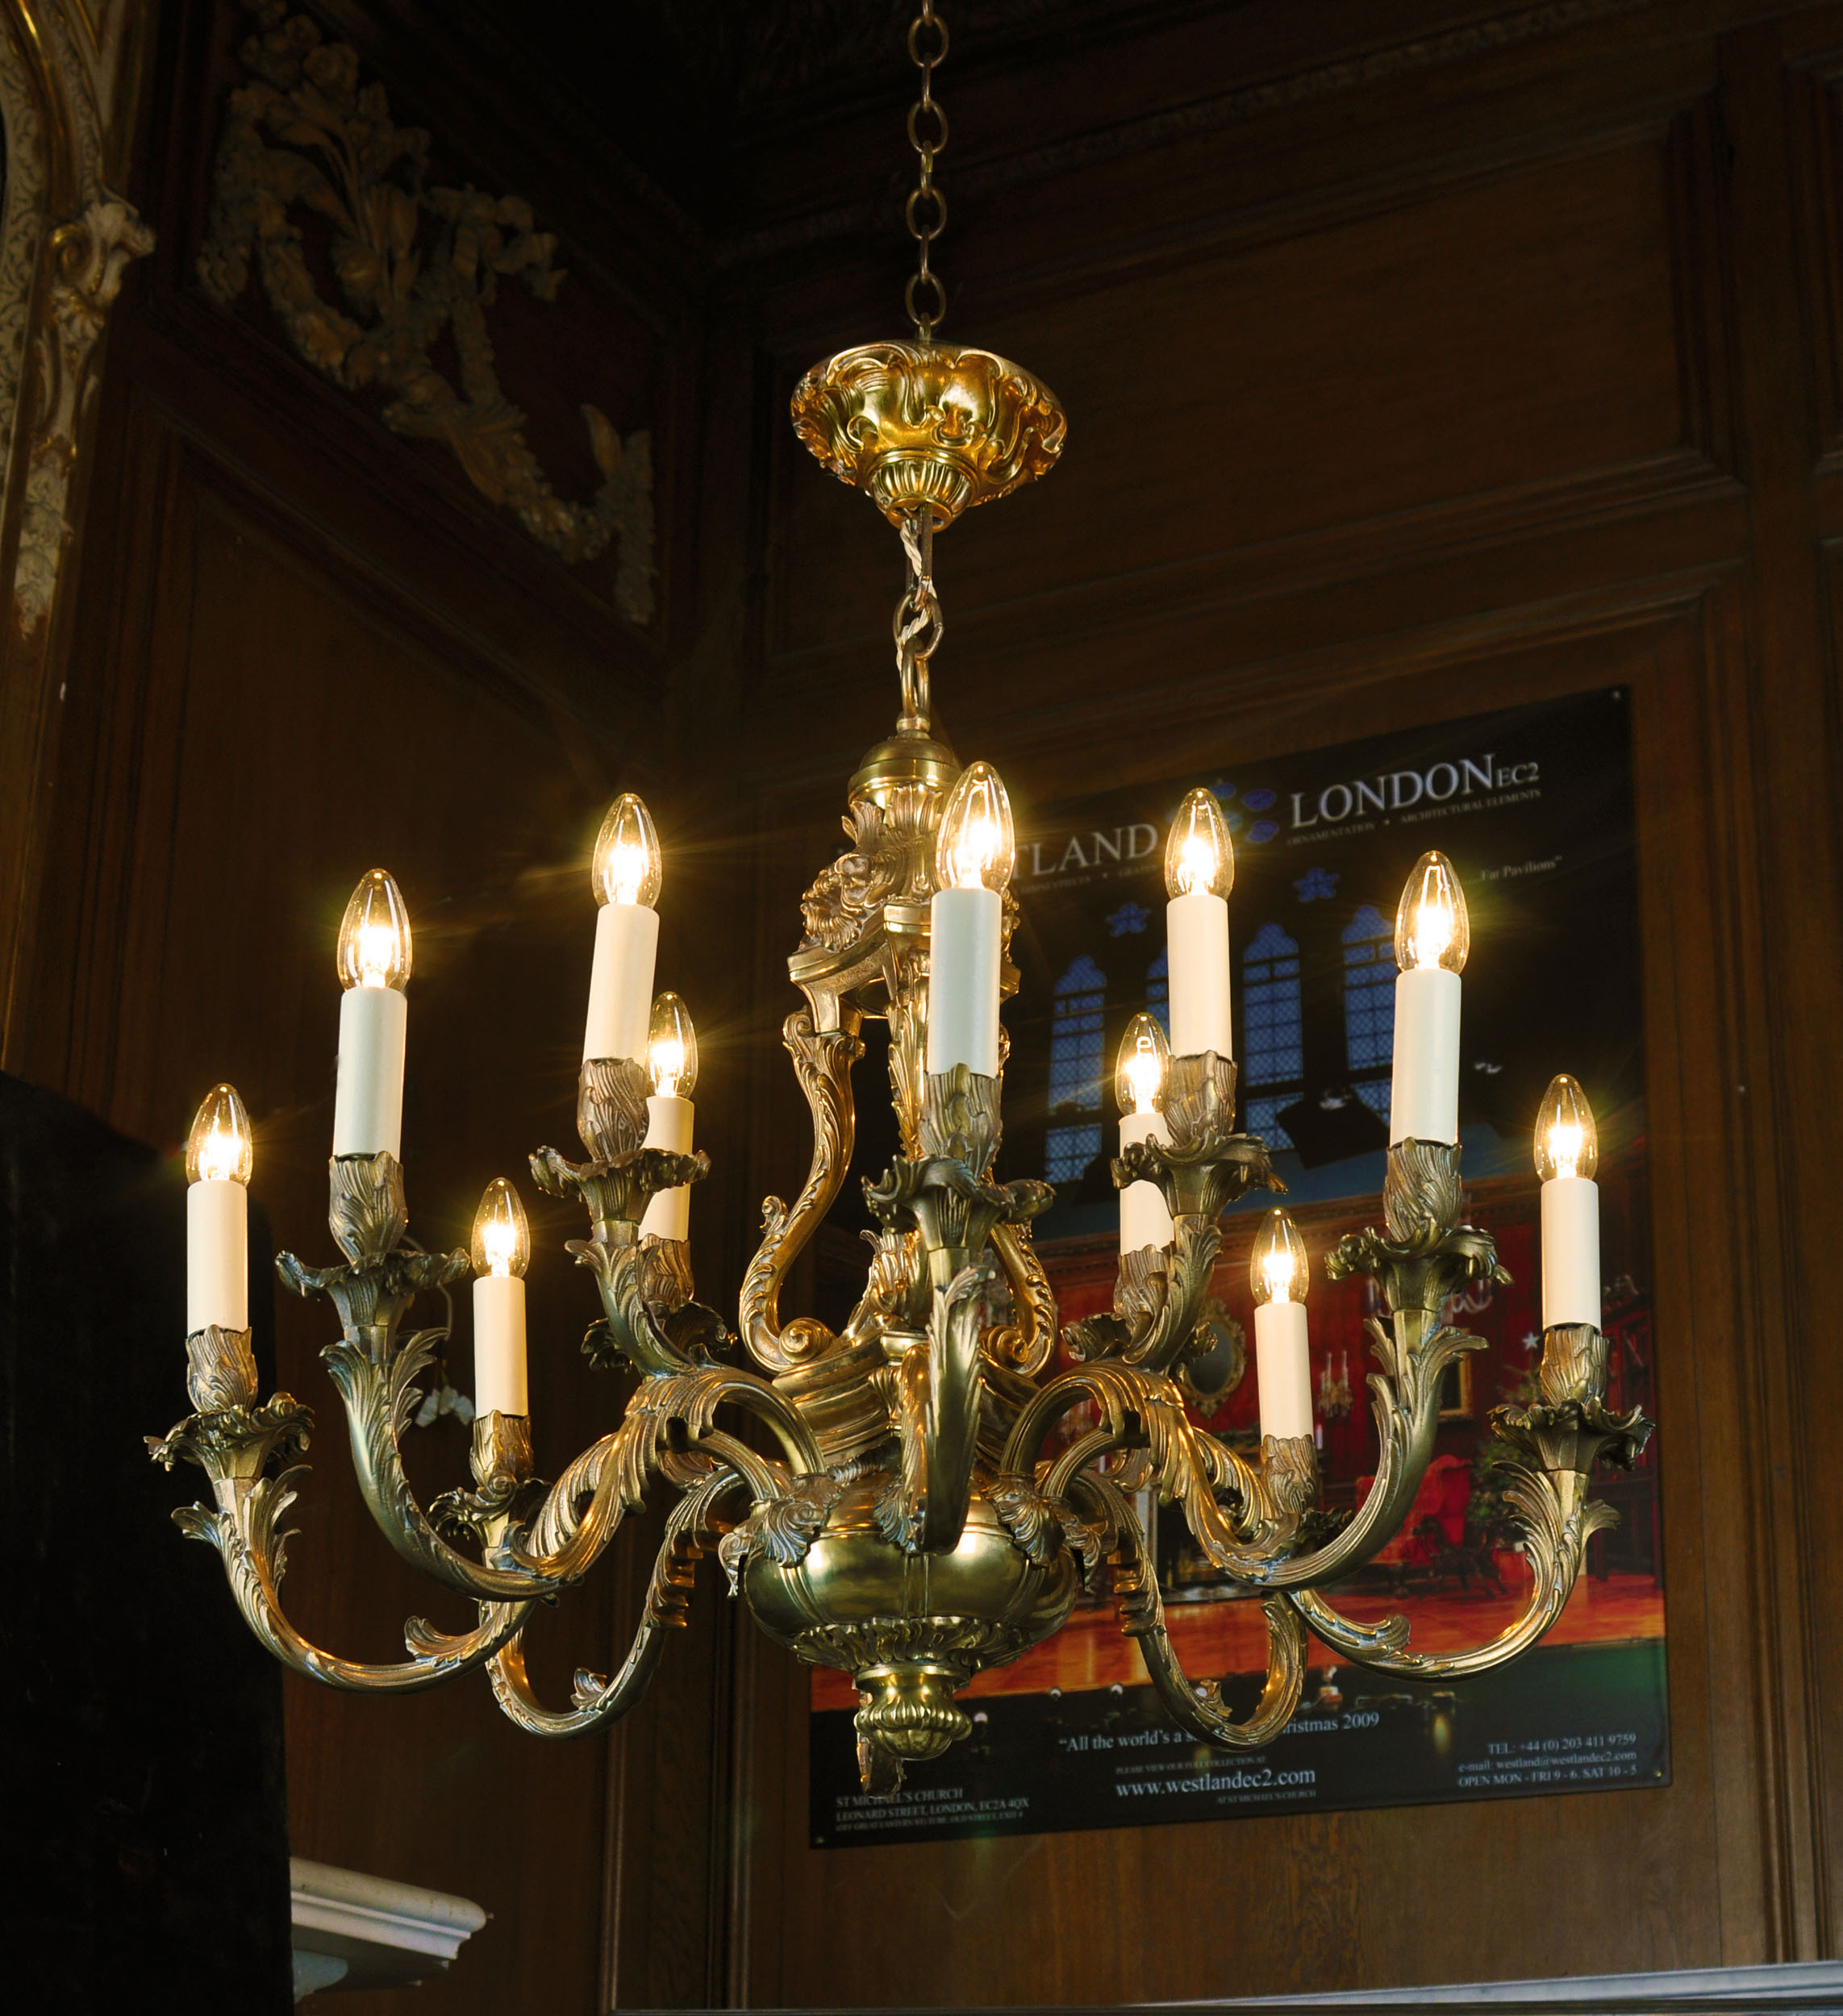 A Rococo Style 12 Light Bronze Chandelier
